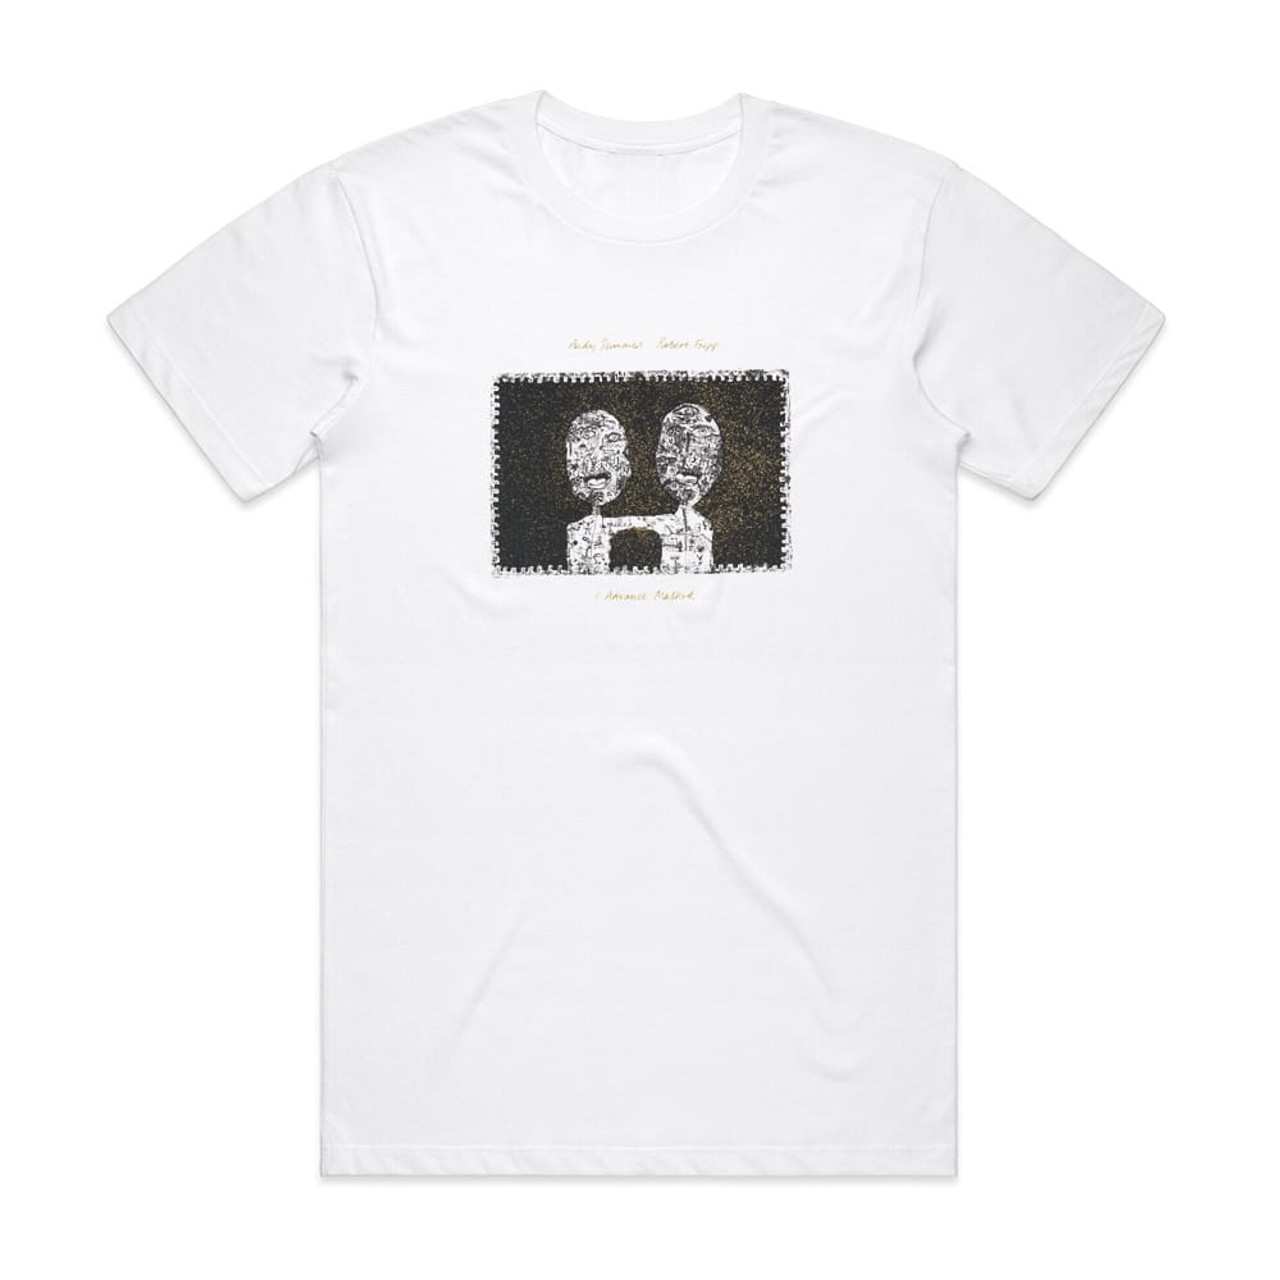 Andy Summers I Advance Masked Album Cover T-Shirt White